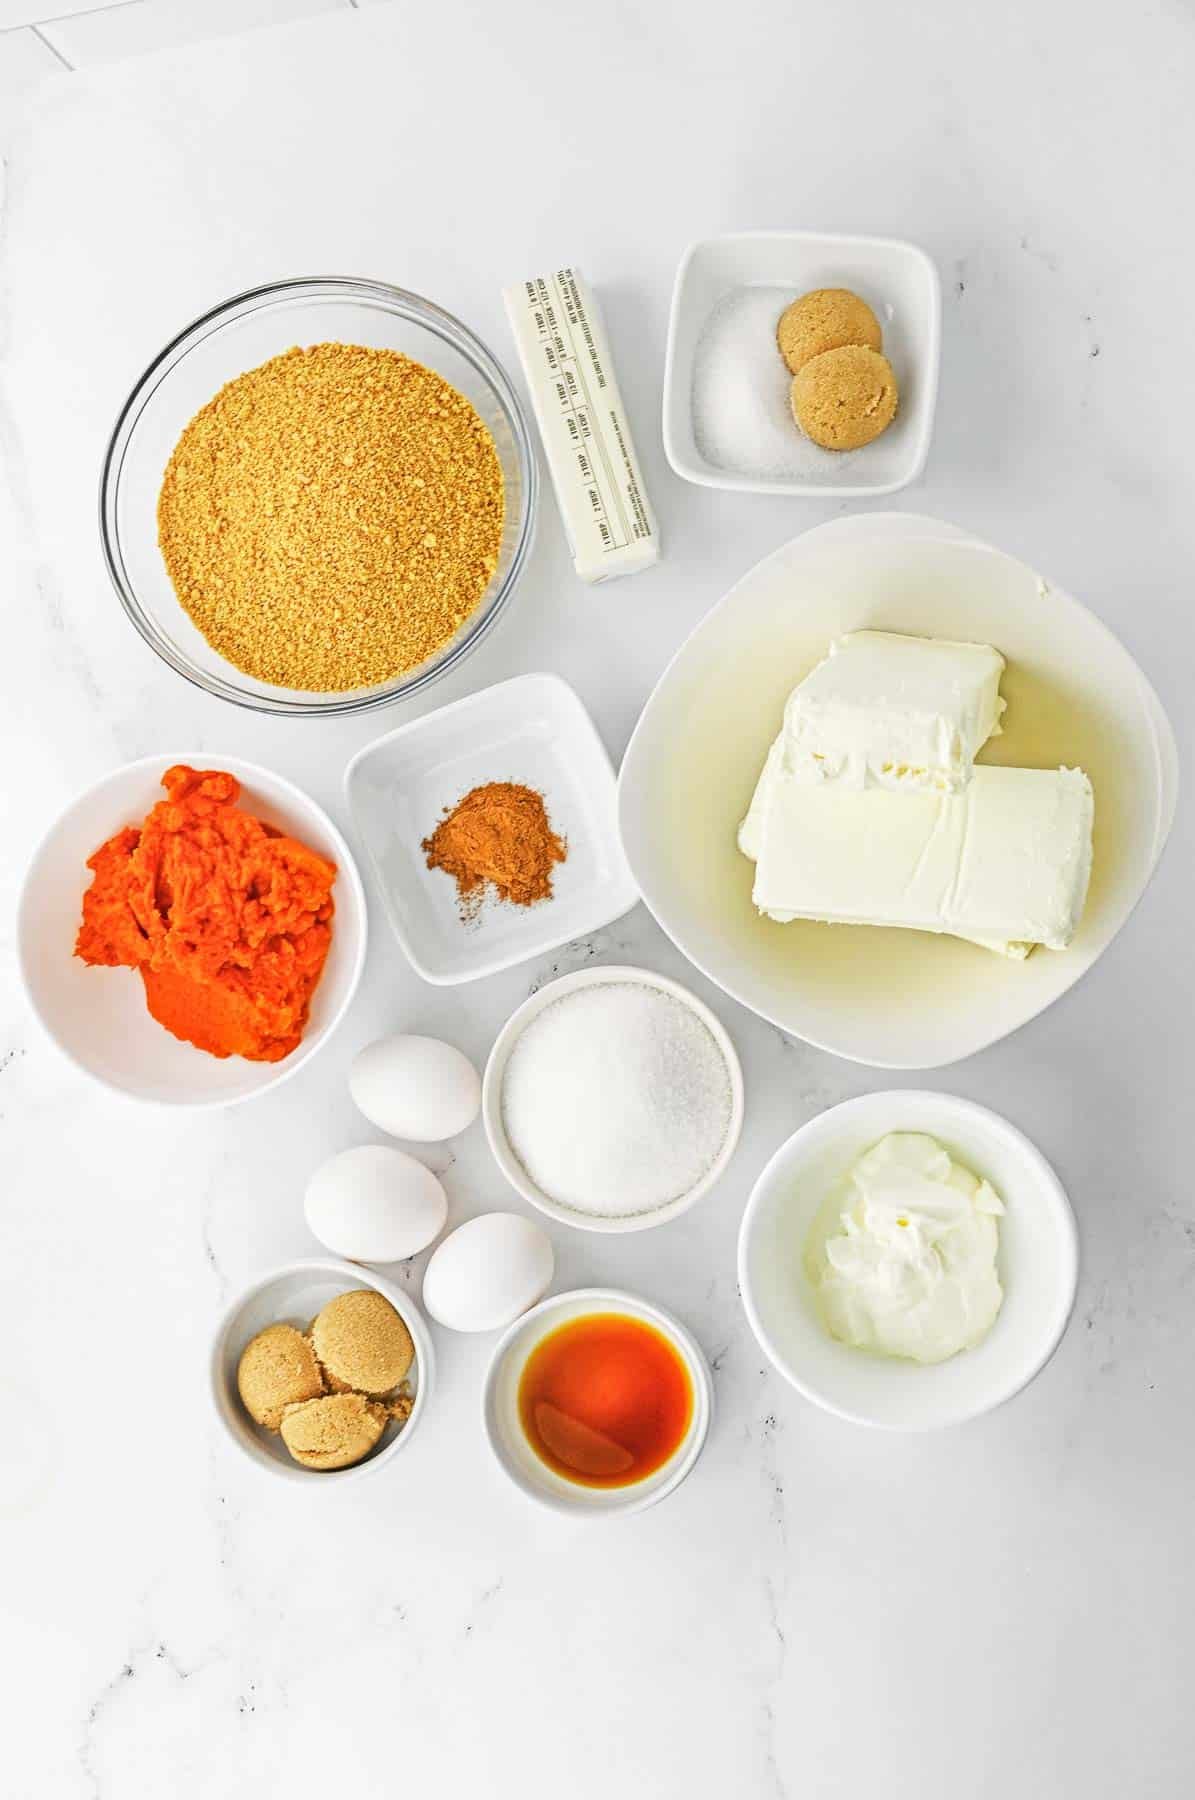 The ingredients for a pumpkin swirl cheesecake bars - Graham cracker crumbs, butter, sugar, brown sugar, pumpkin puree, pumpkin pie spice, cream cheese, sour cream, vanilla extract and eggs.